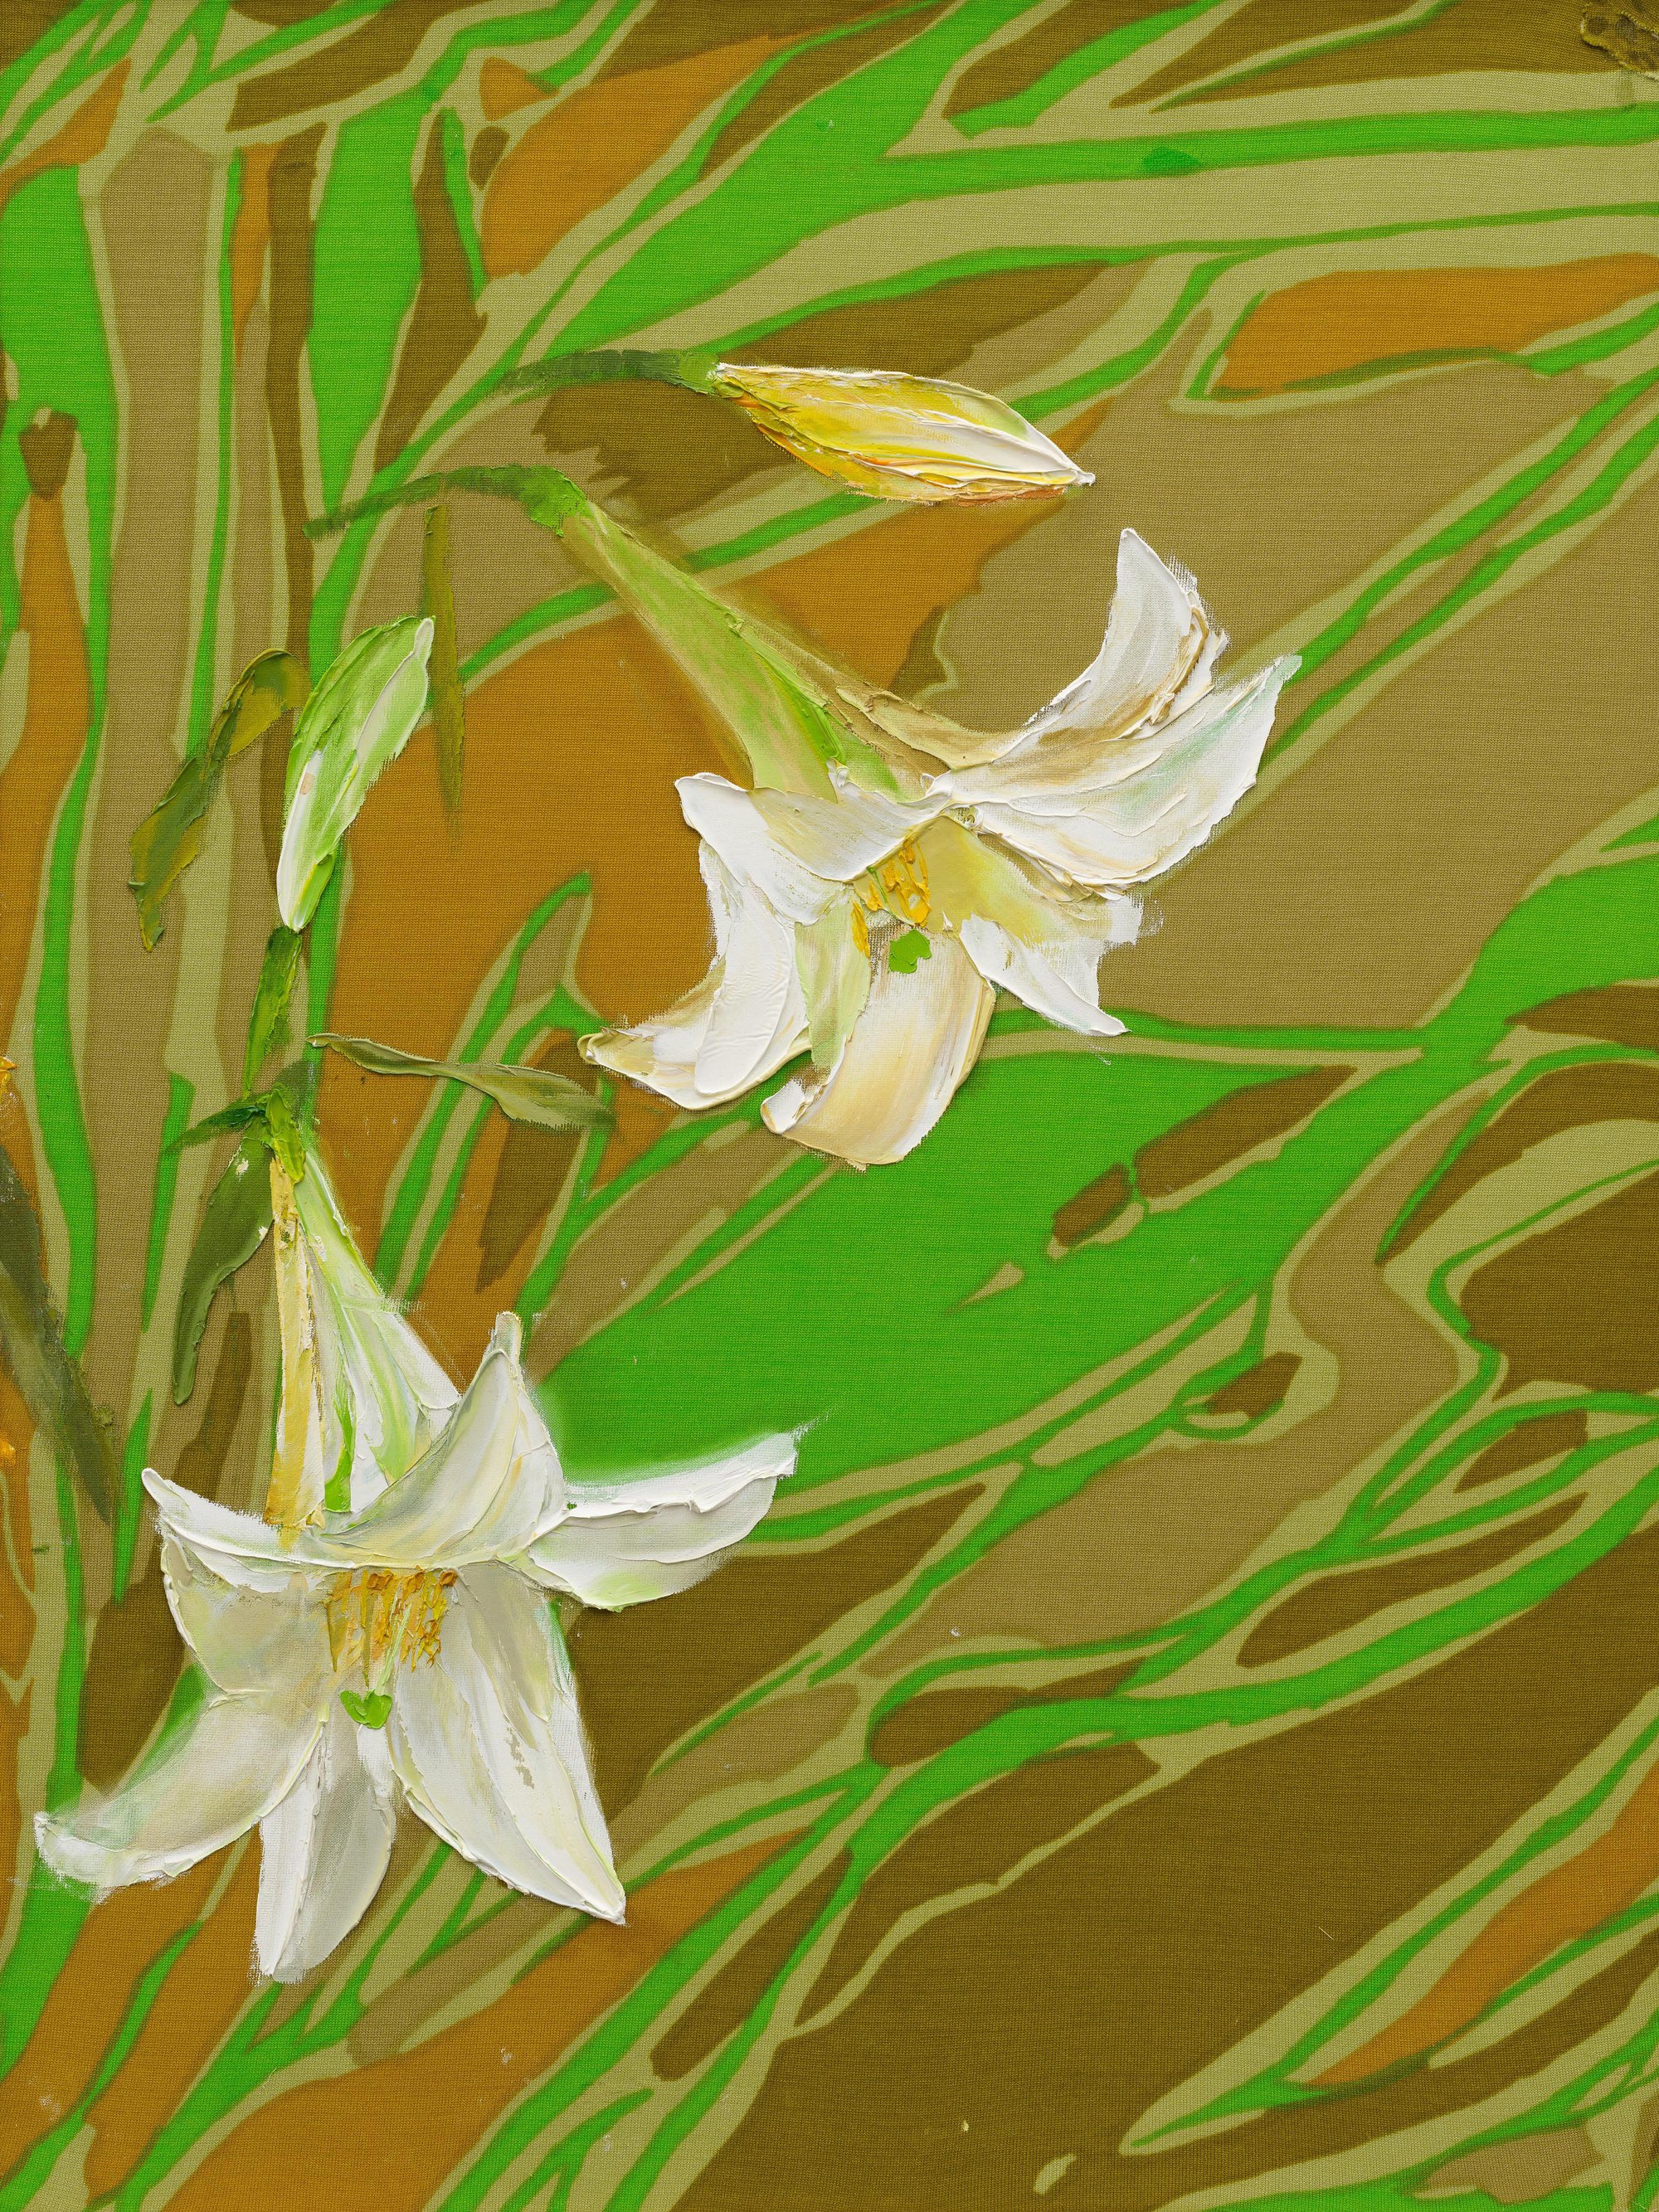 Bernat Klein, Two lillies, oil on screen printed knitted jersey polyester (Diolen), 65 x 50 cm, 1998